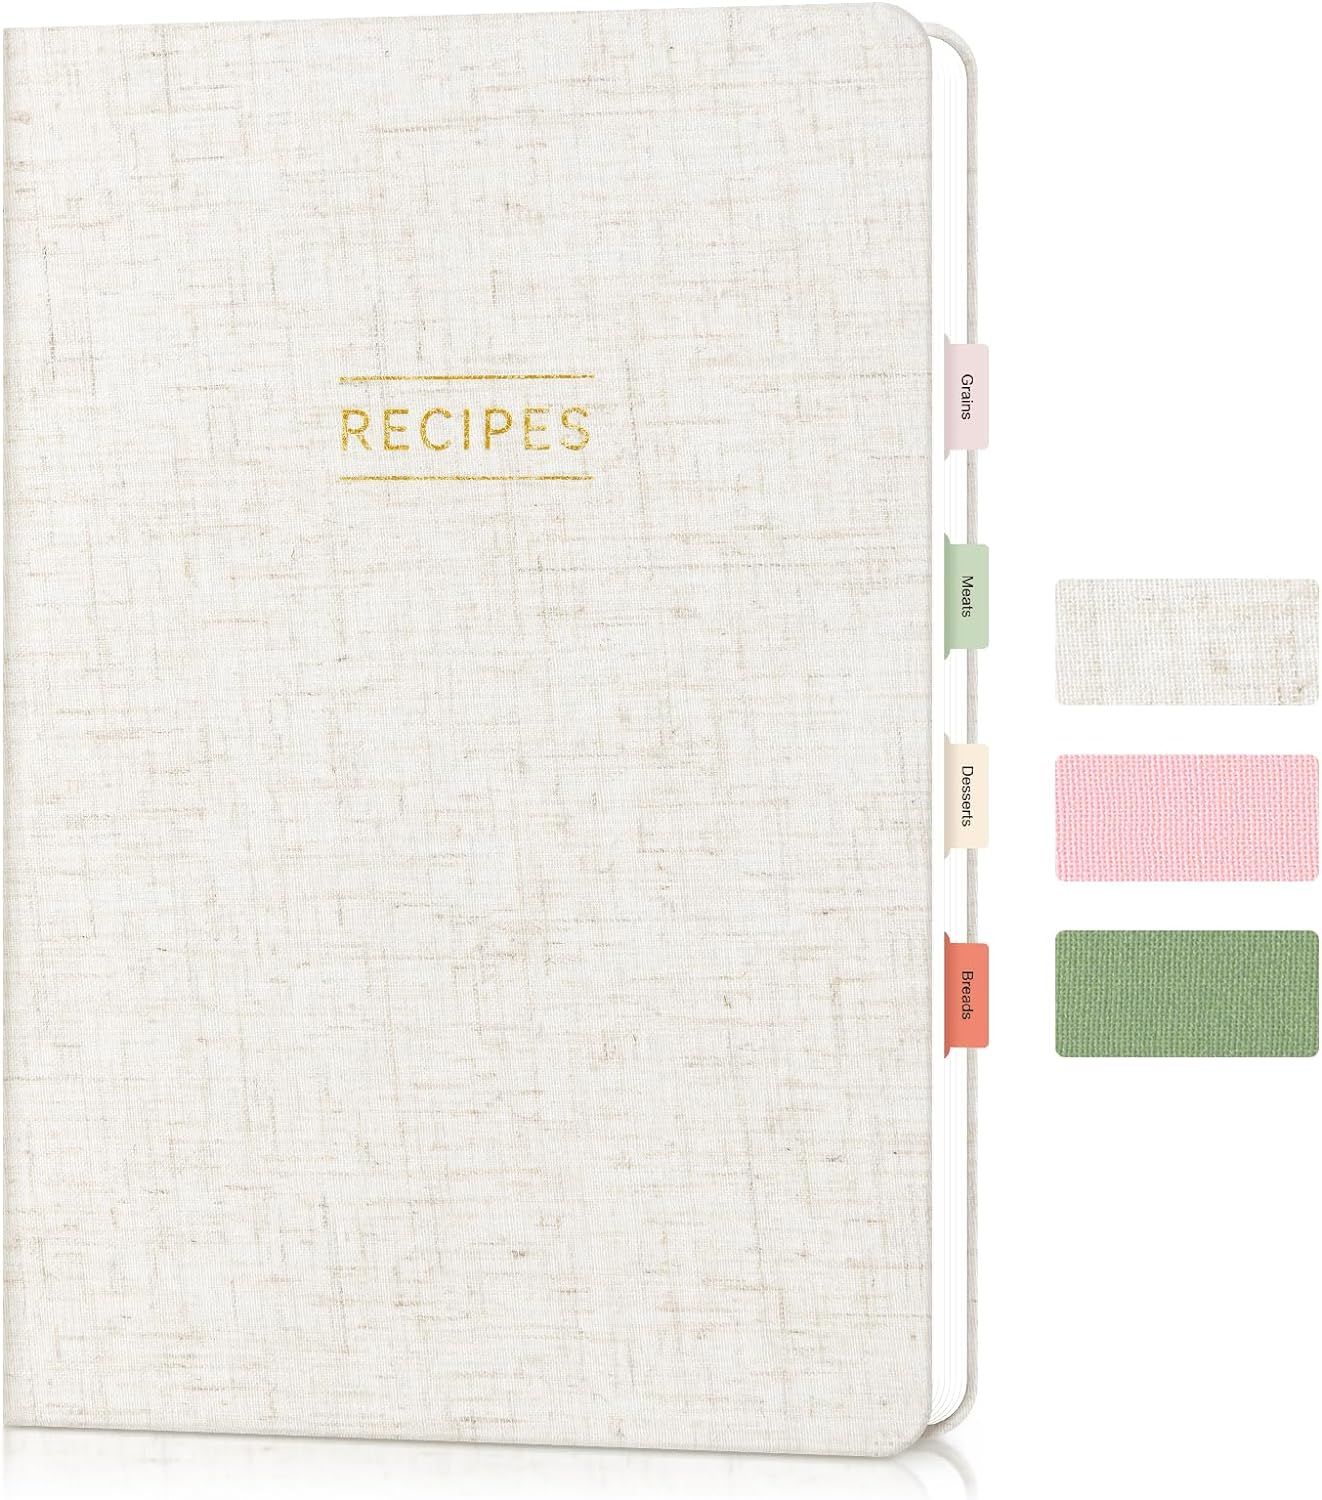 Recipe Book to Write in Your Own Recipes, Aesthetic Blank Family Recipe Journal Notebook with Tab... | Amazon (US)